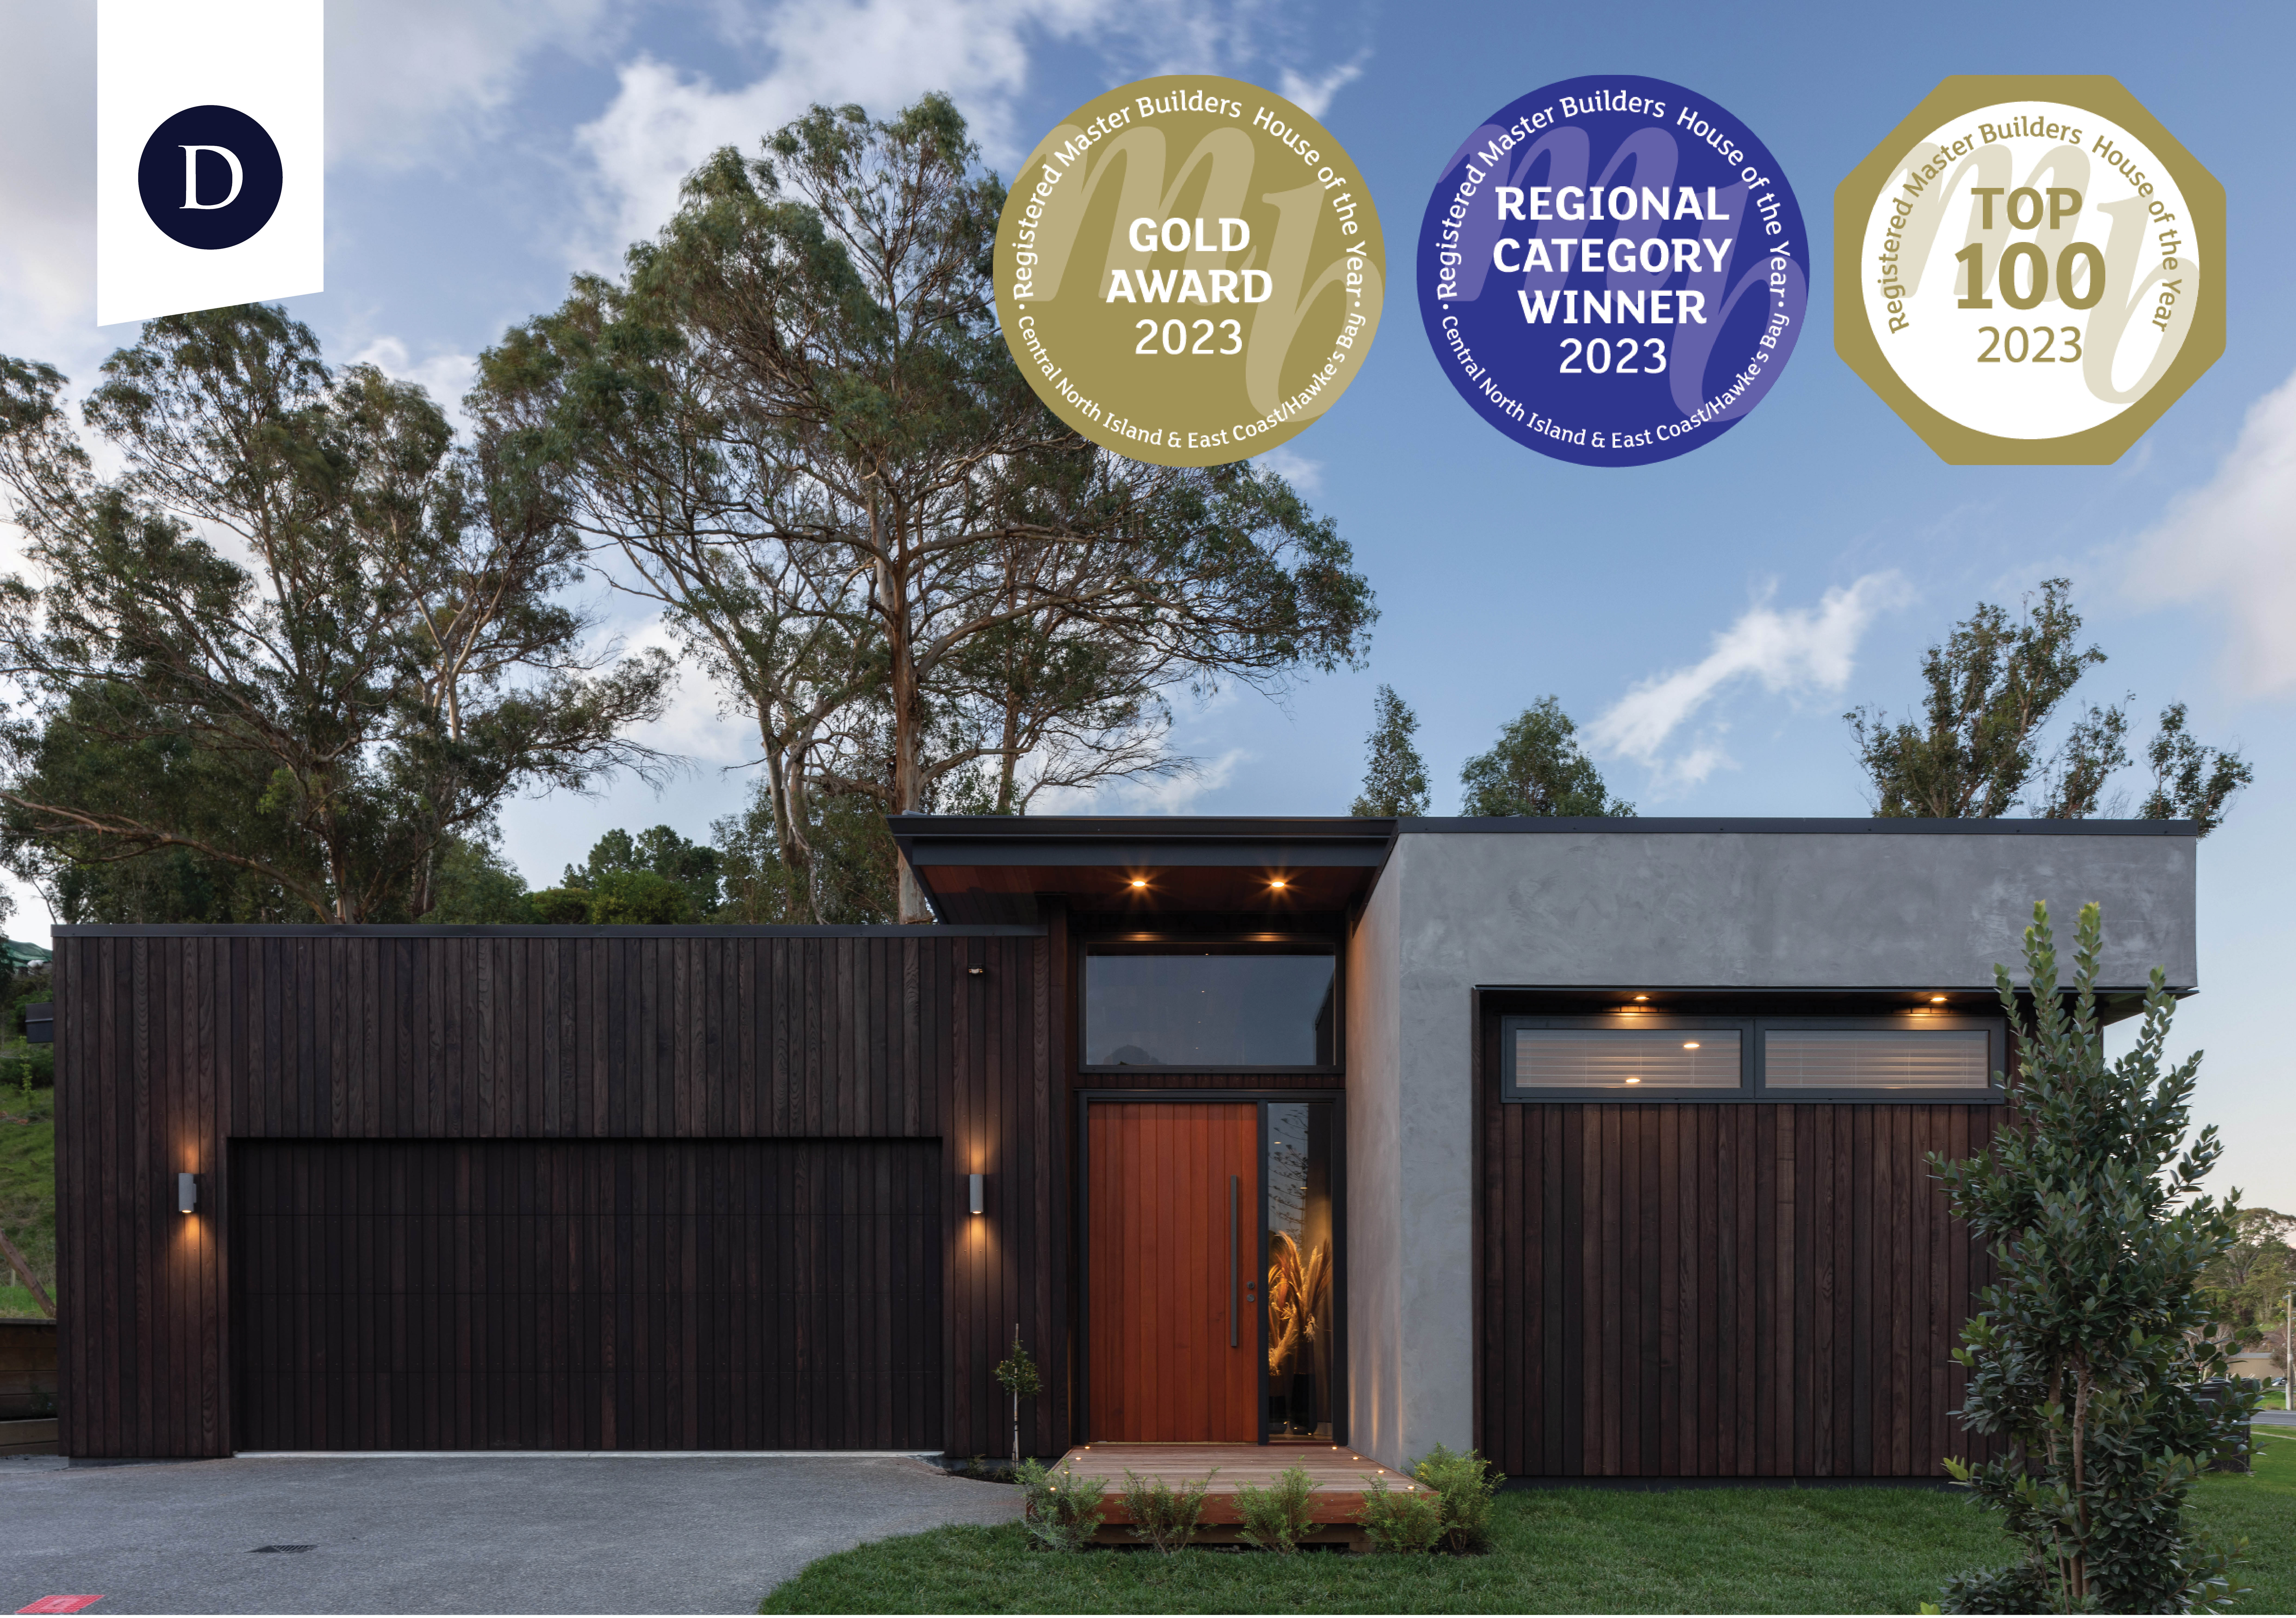 Hawkes Bay Showhome is in the Top 100 House of the Year